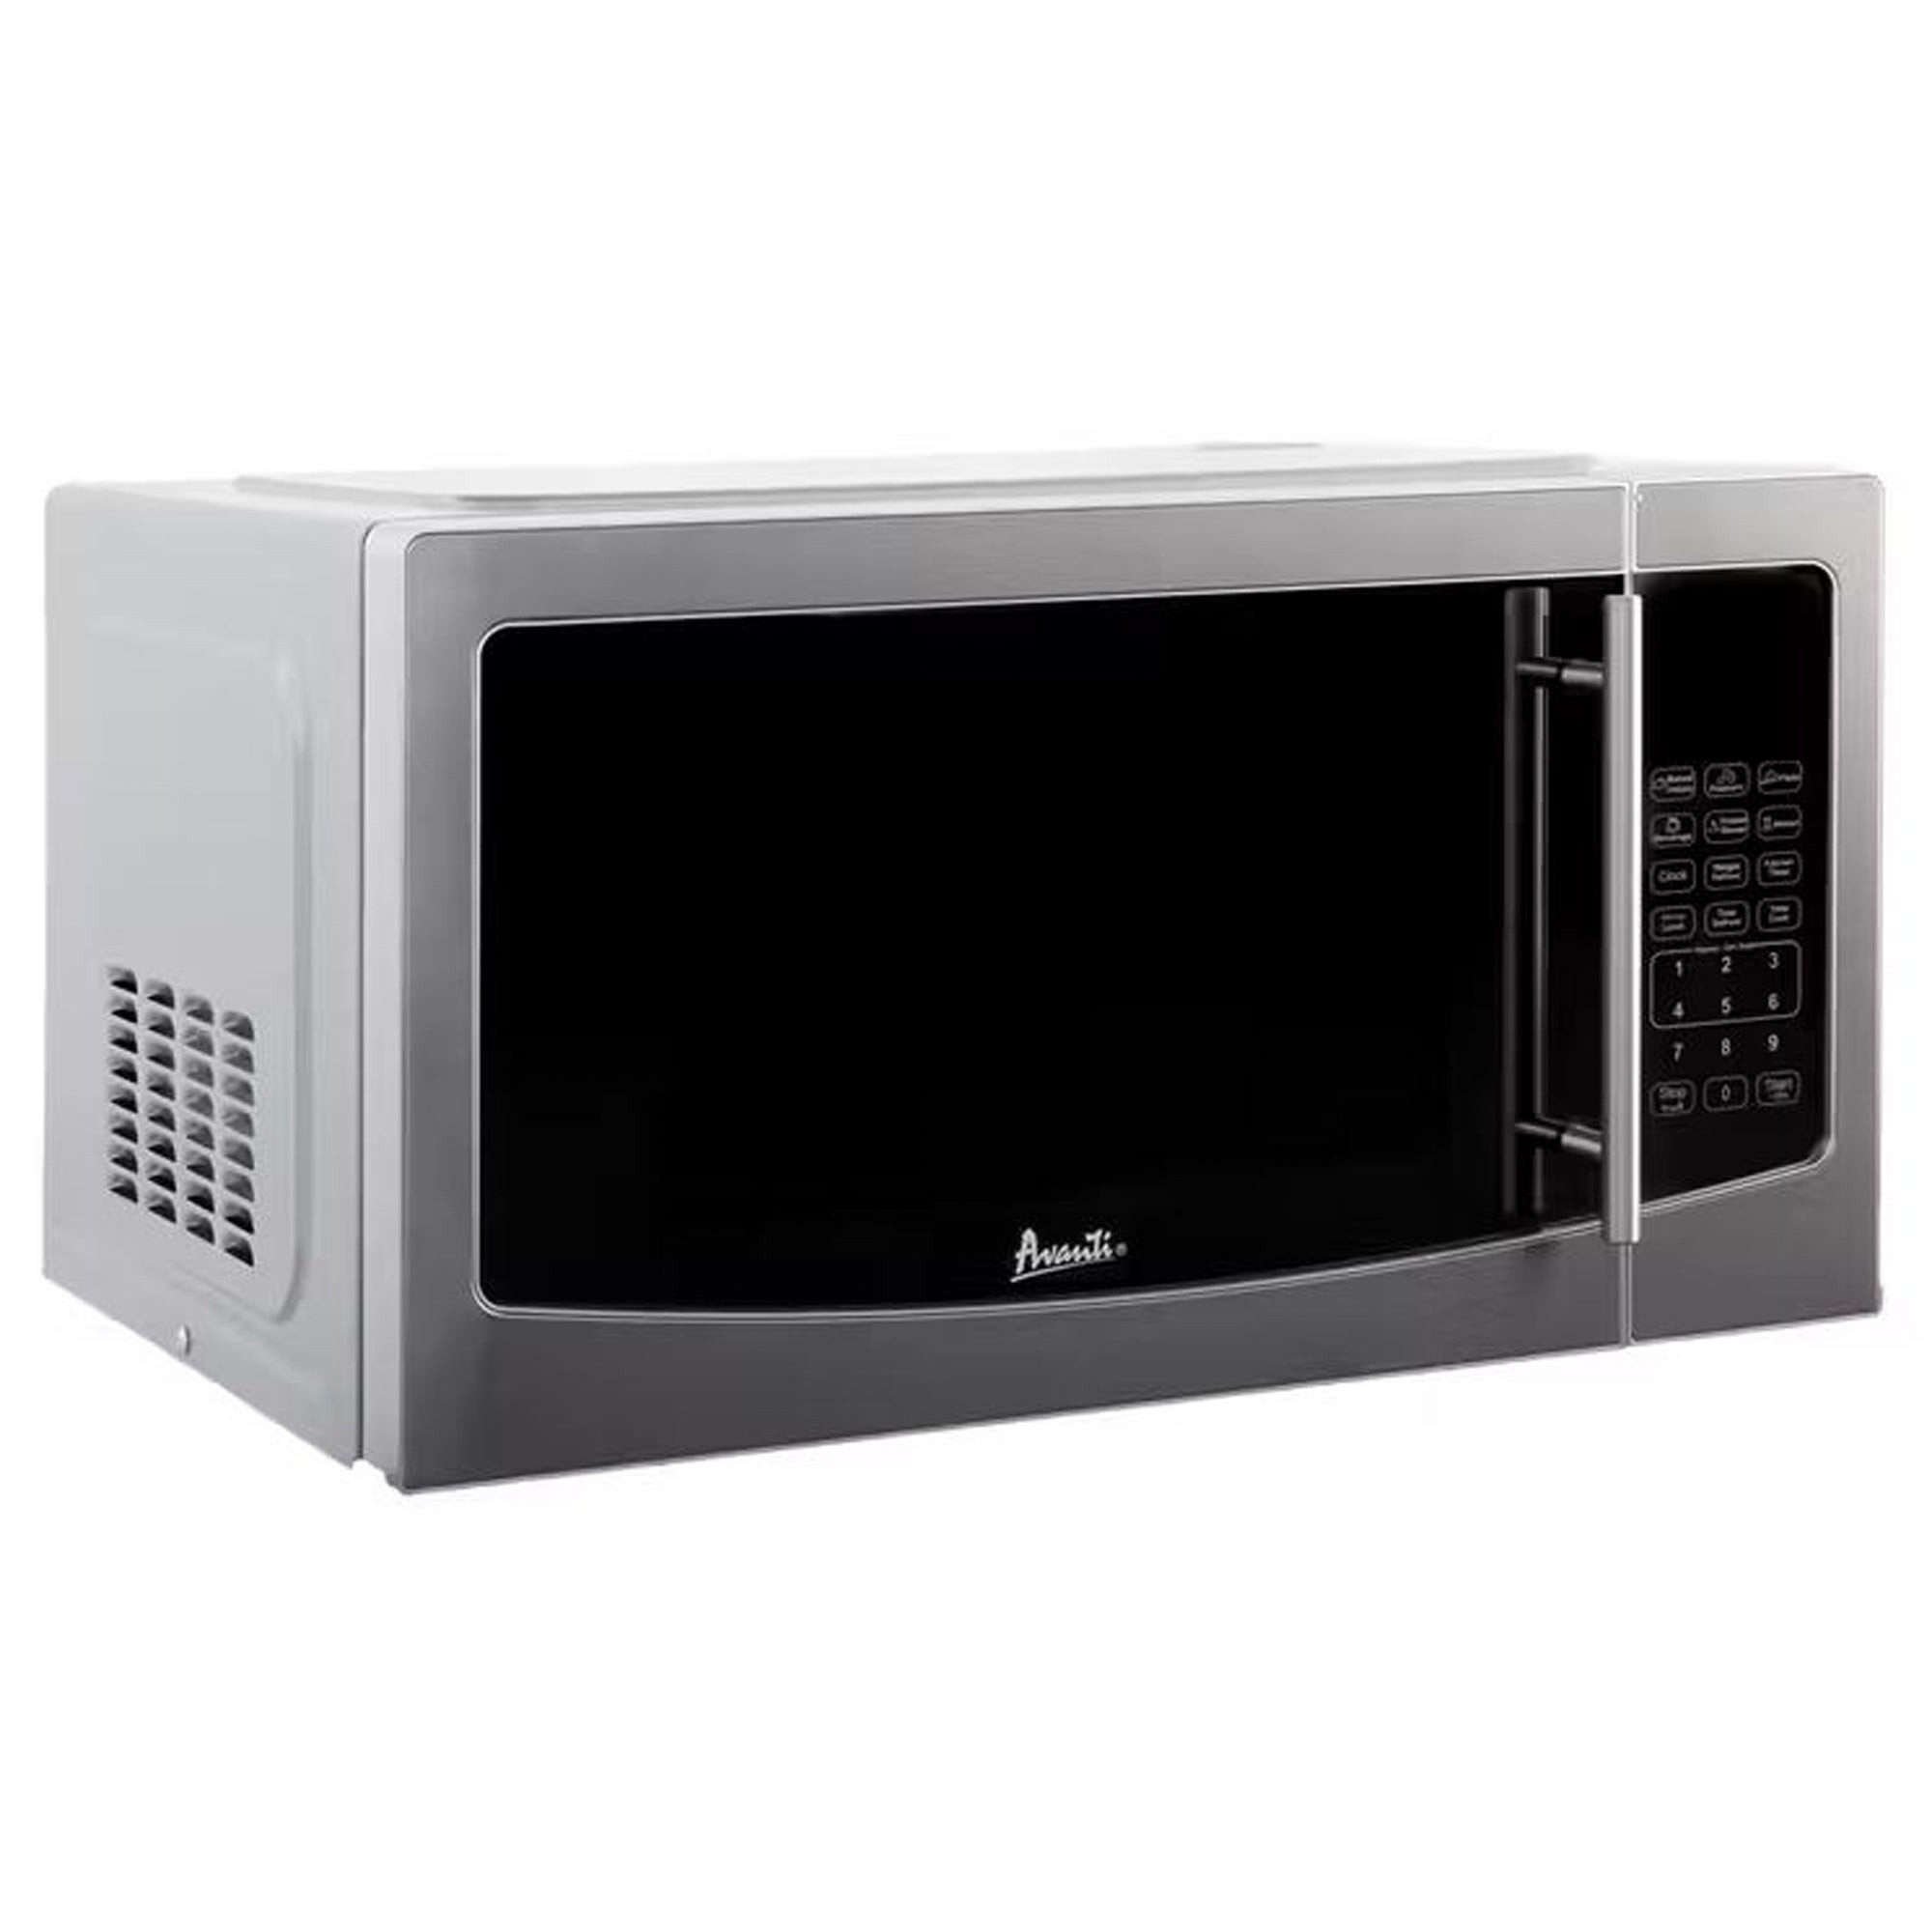 1.1 Cu. Ft. 1000W Microwave Oven Stainless Stele w/ Mirrored Door